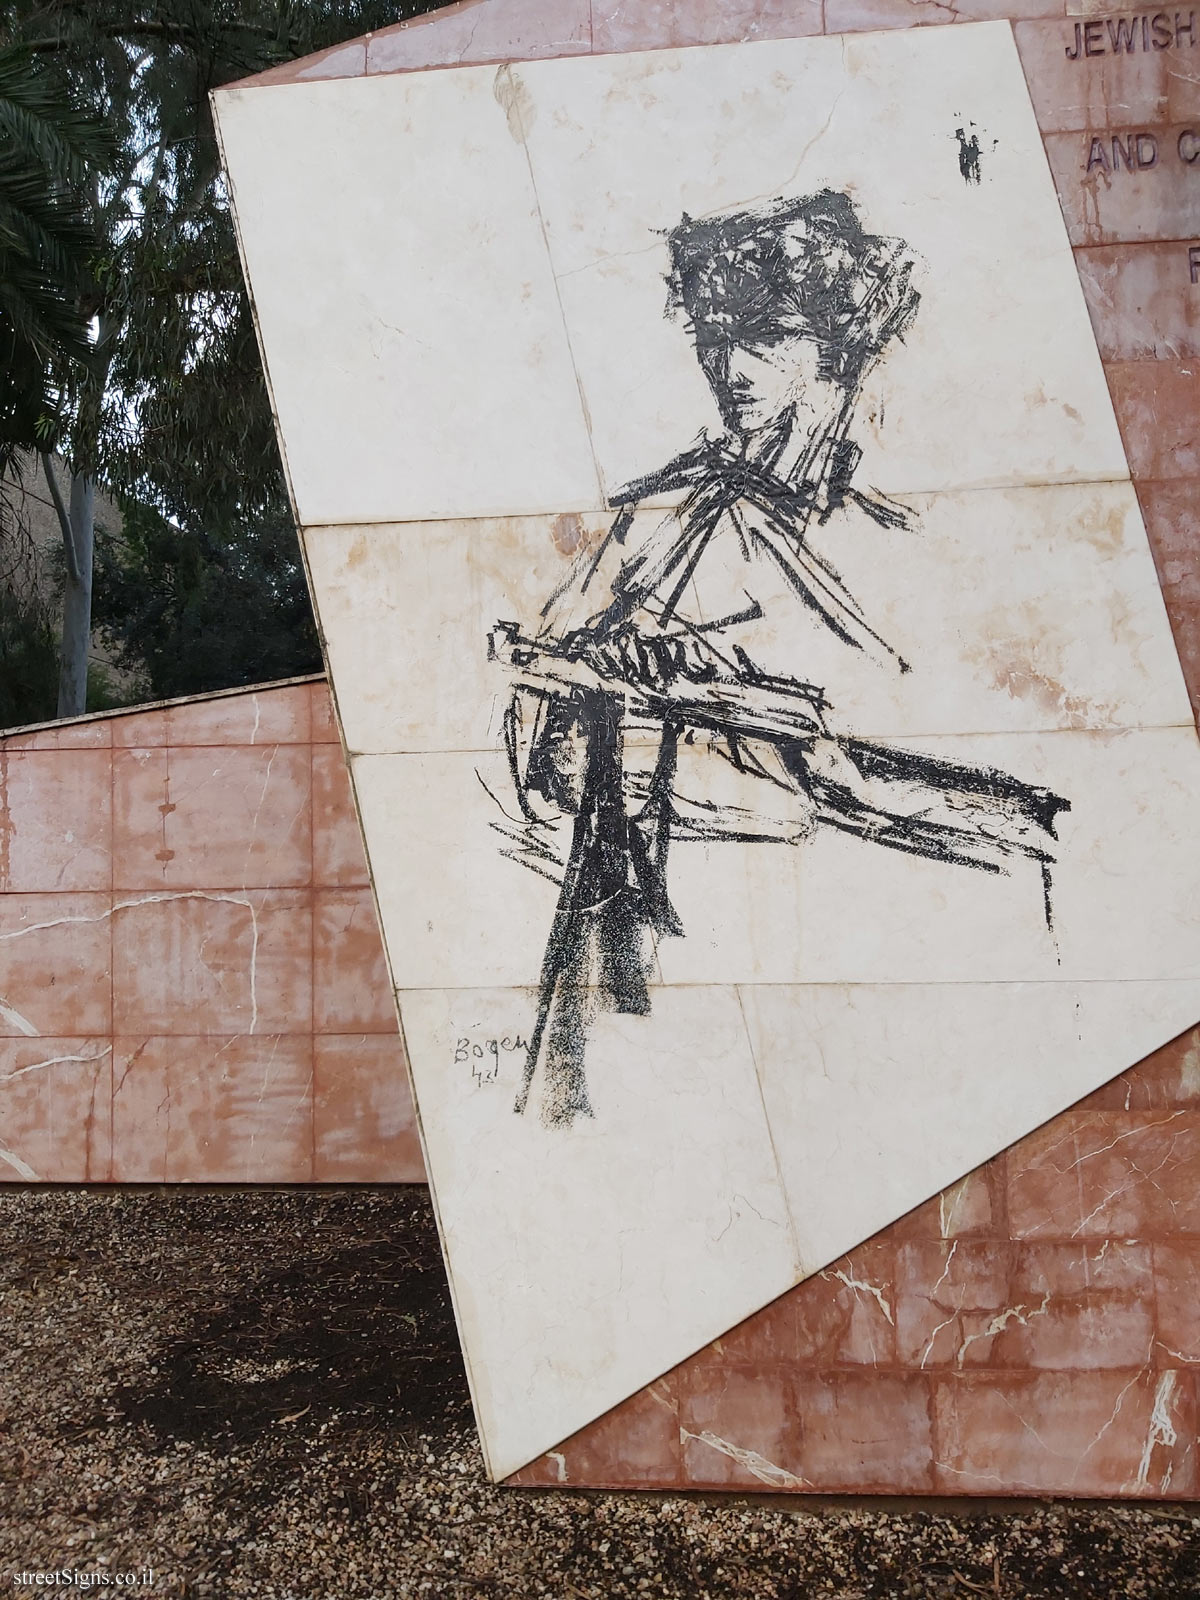 Givatayim - A monument in memory of the Jewish partisans and Jewish fighters from Wolyn - Korazin St 10, Giv’atayim, Israel